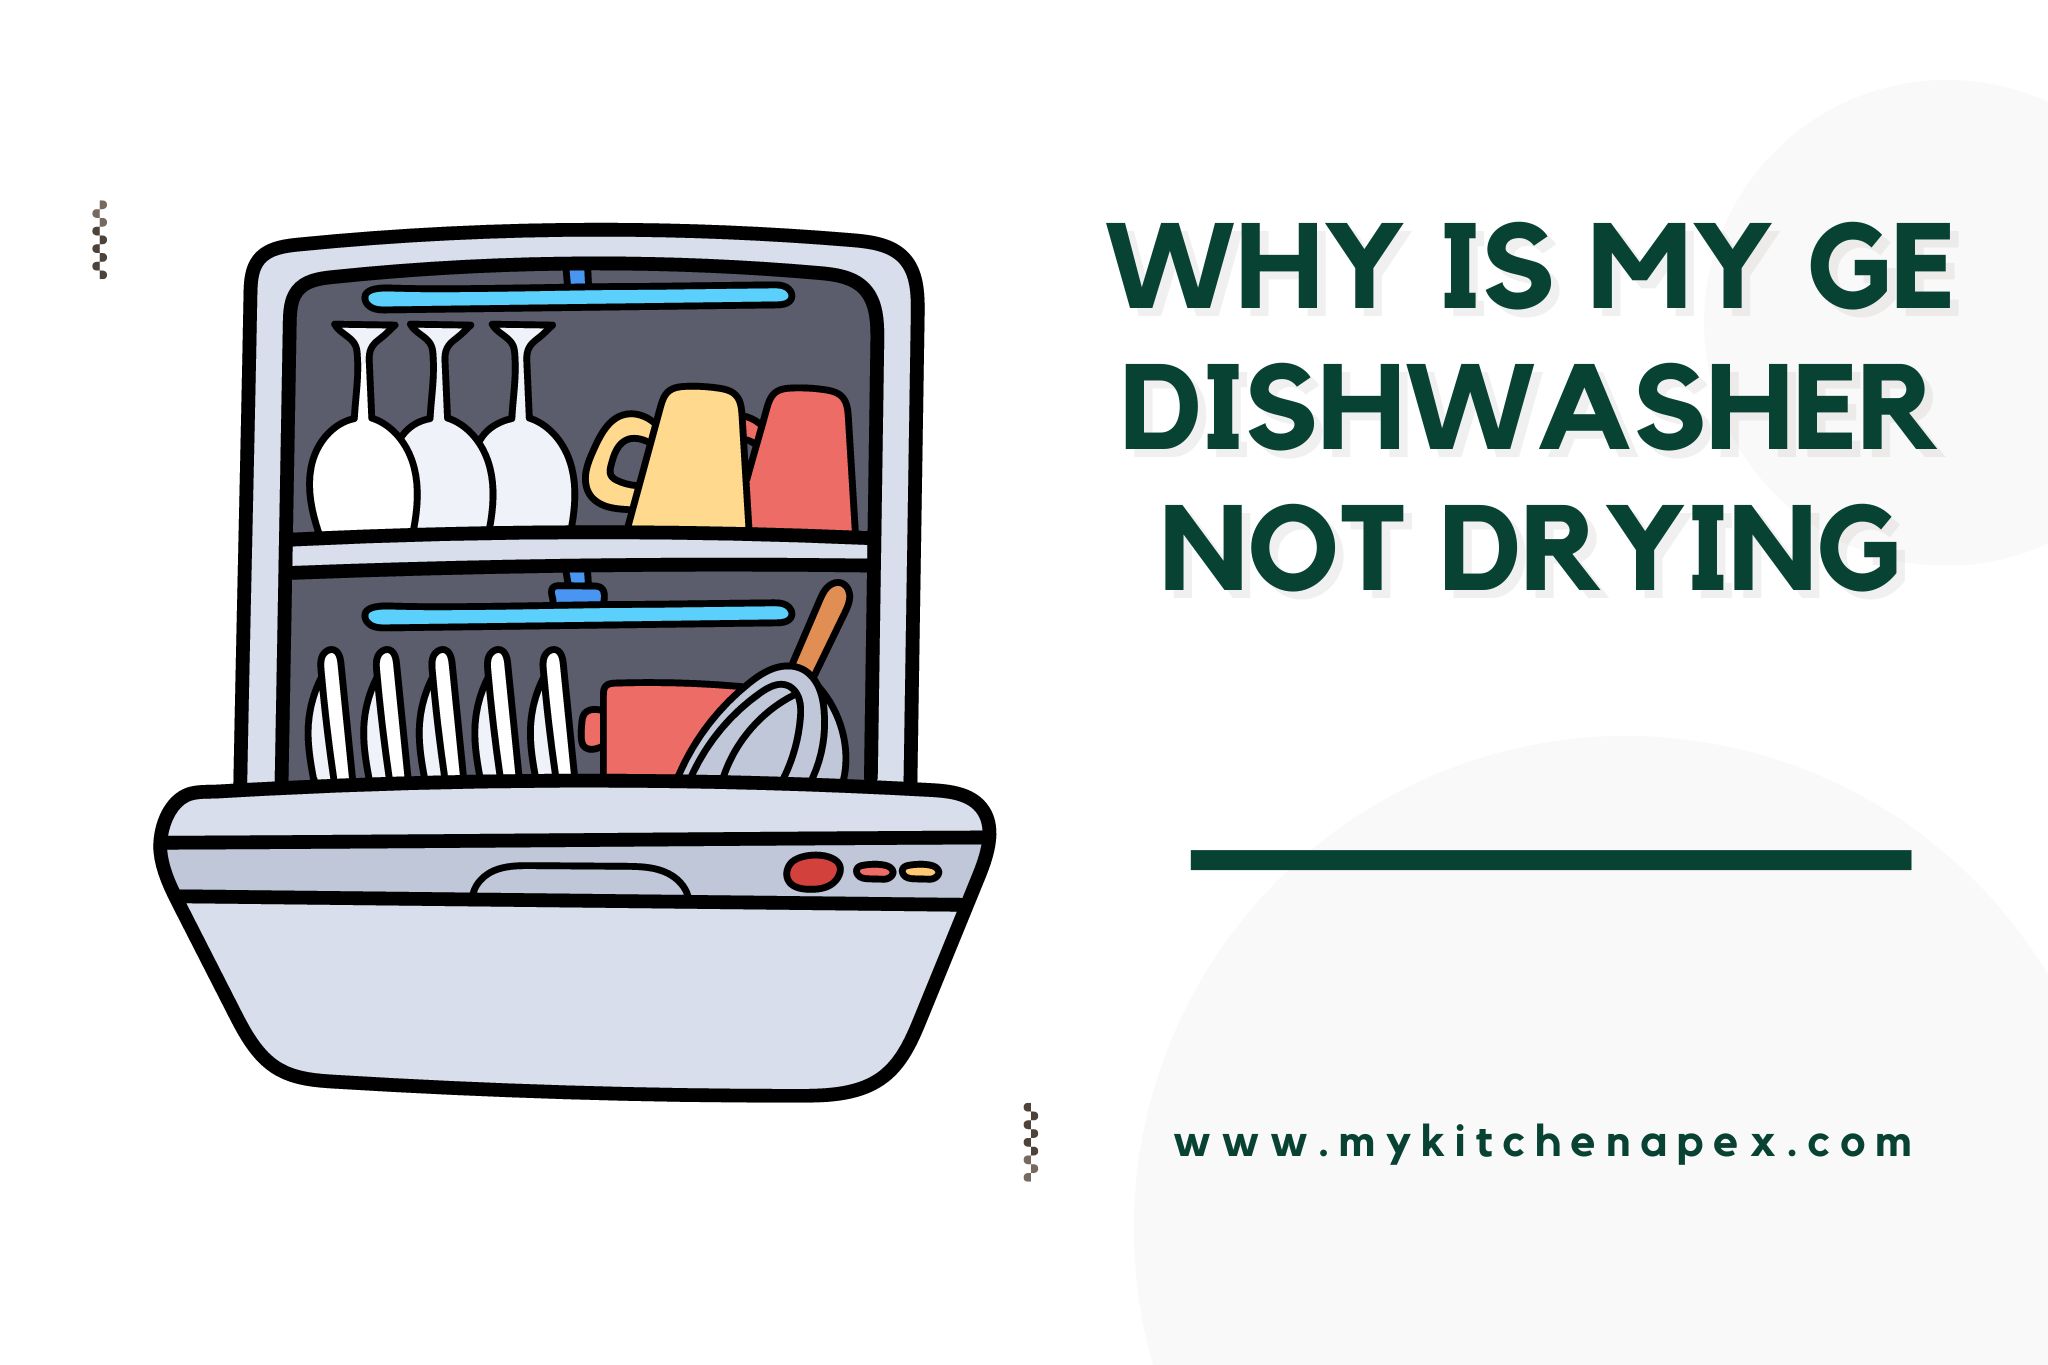 why is my ge dishwasher not drying